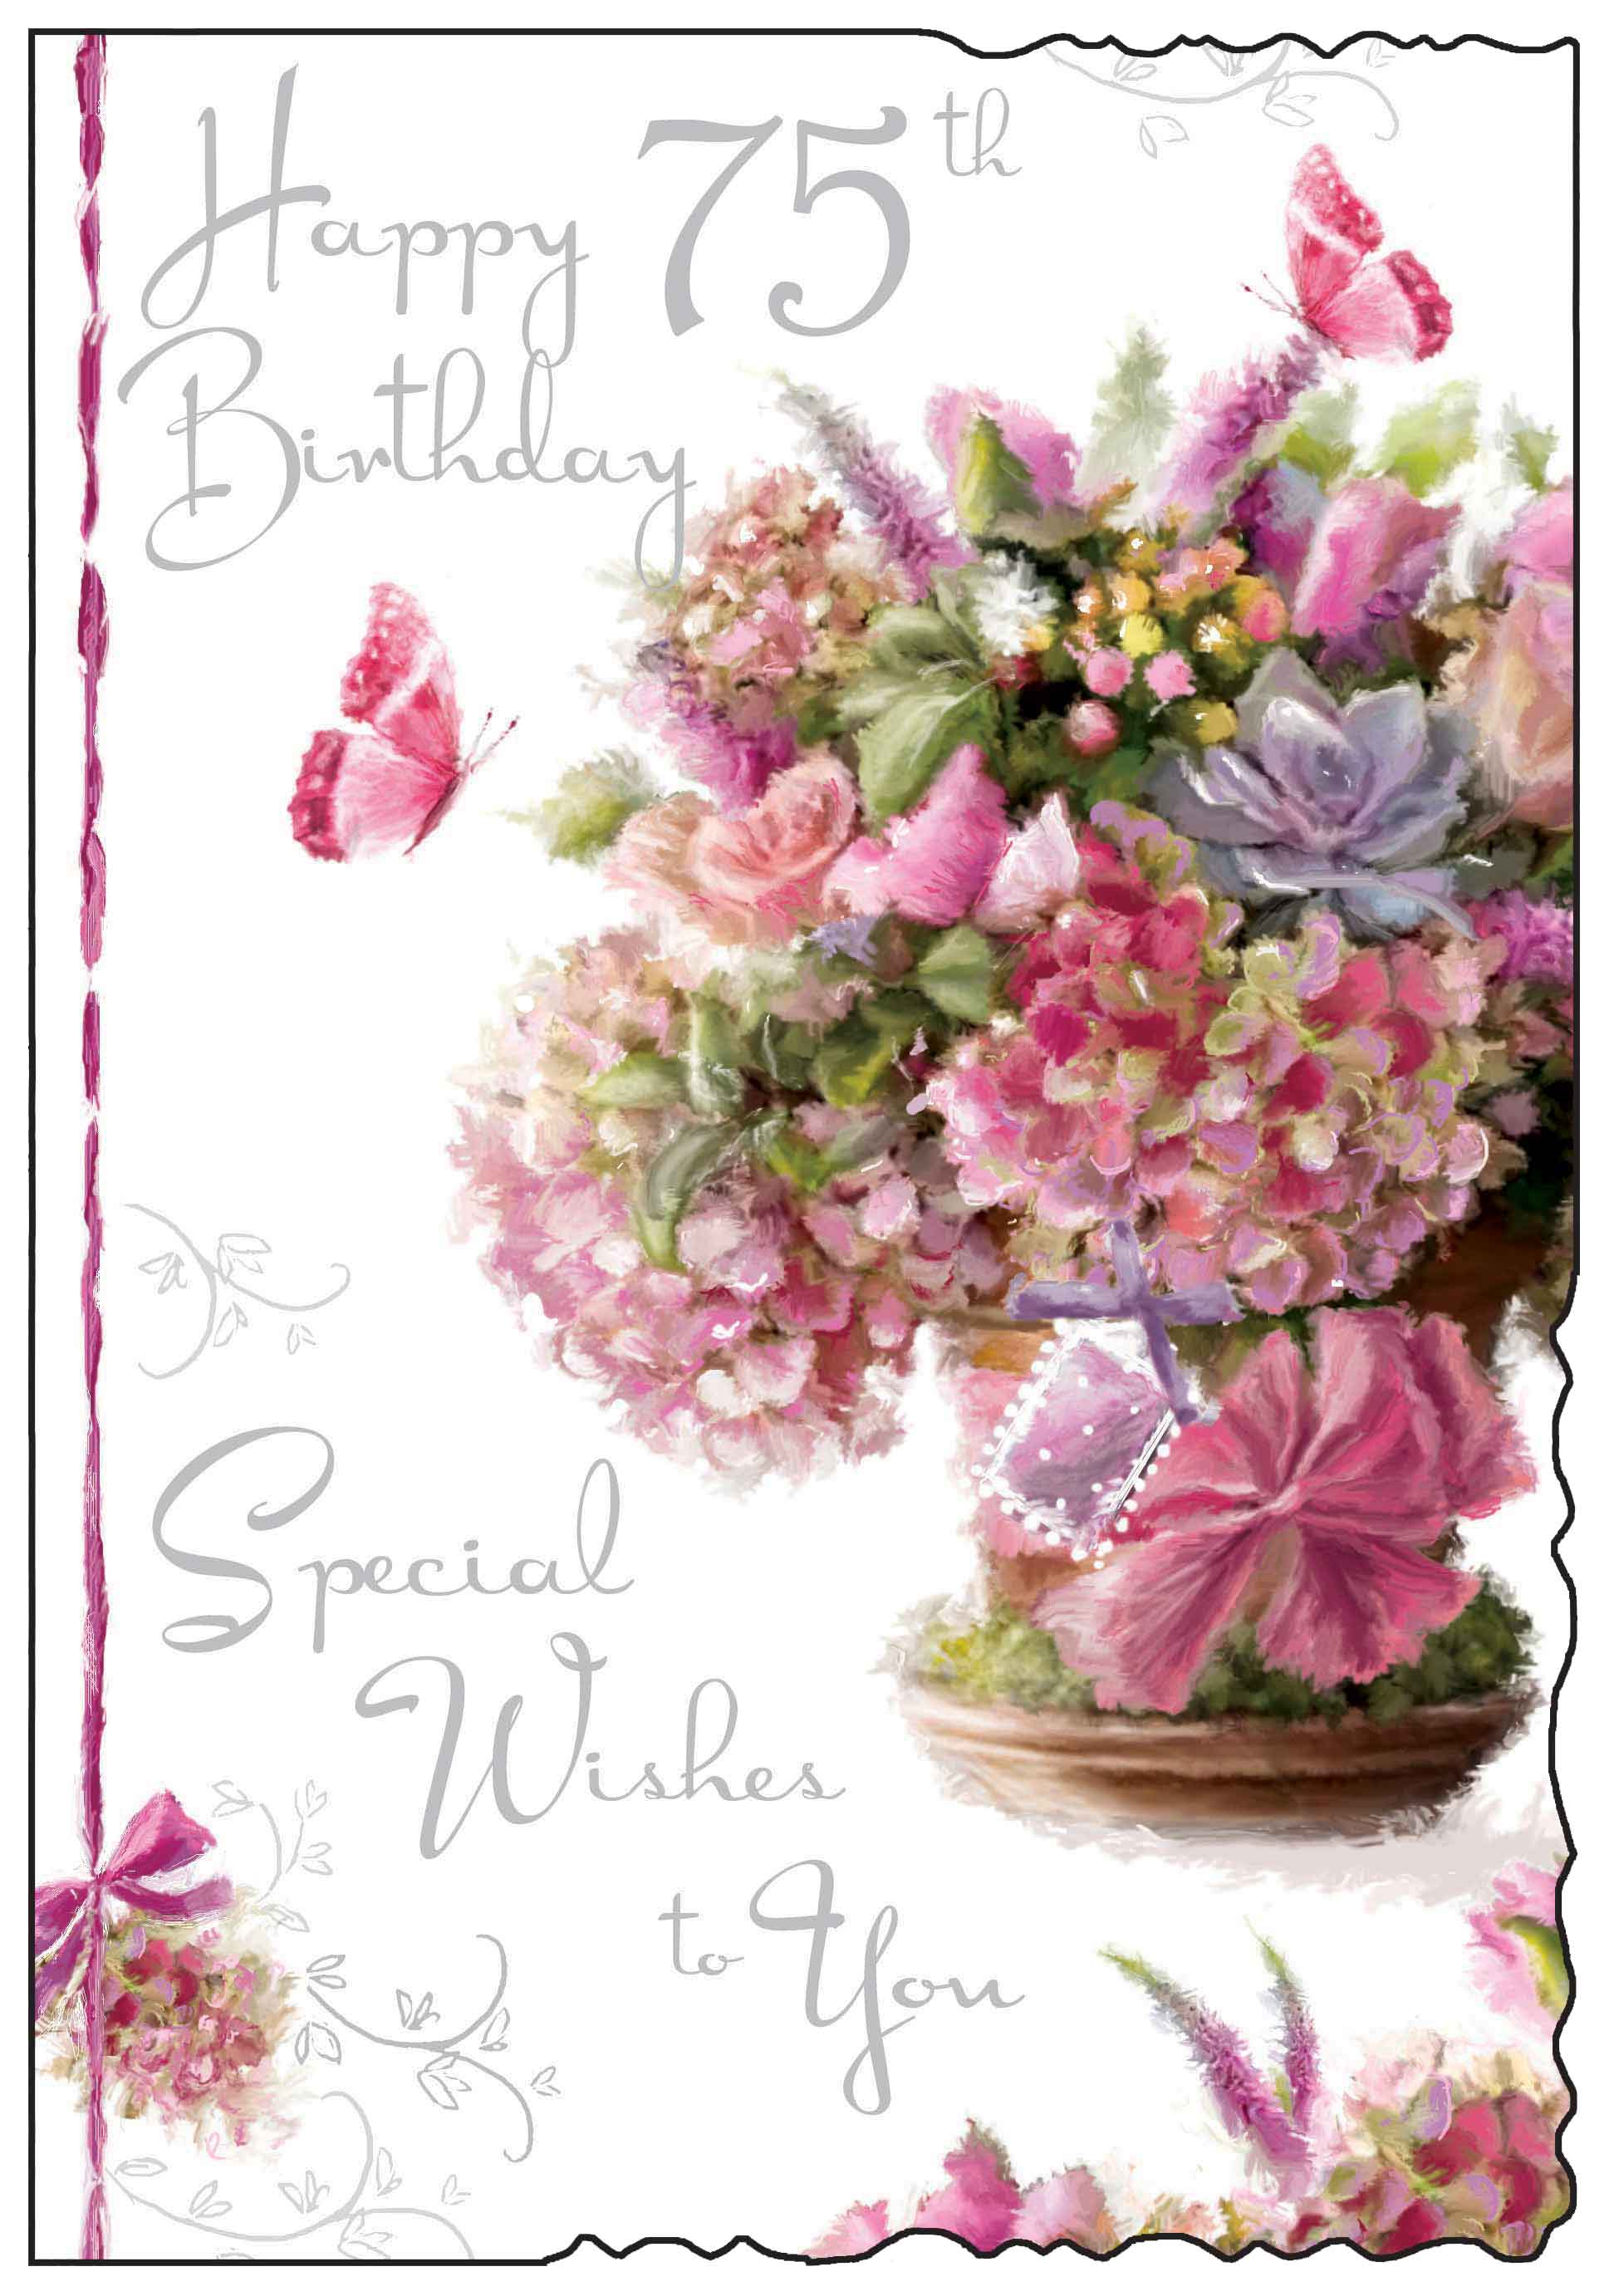 75th Birthday Card - Posh Bouquet And Pretty Butterflies